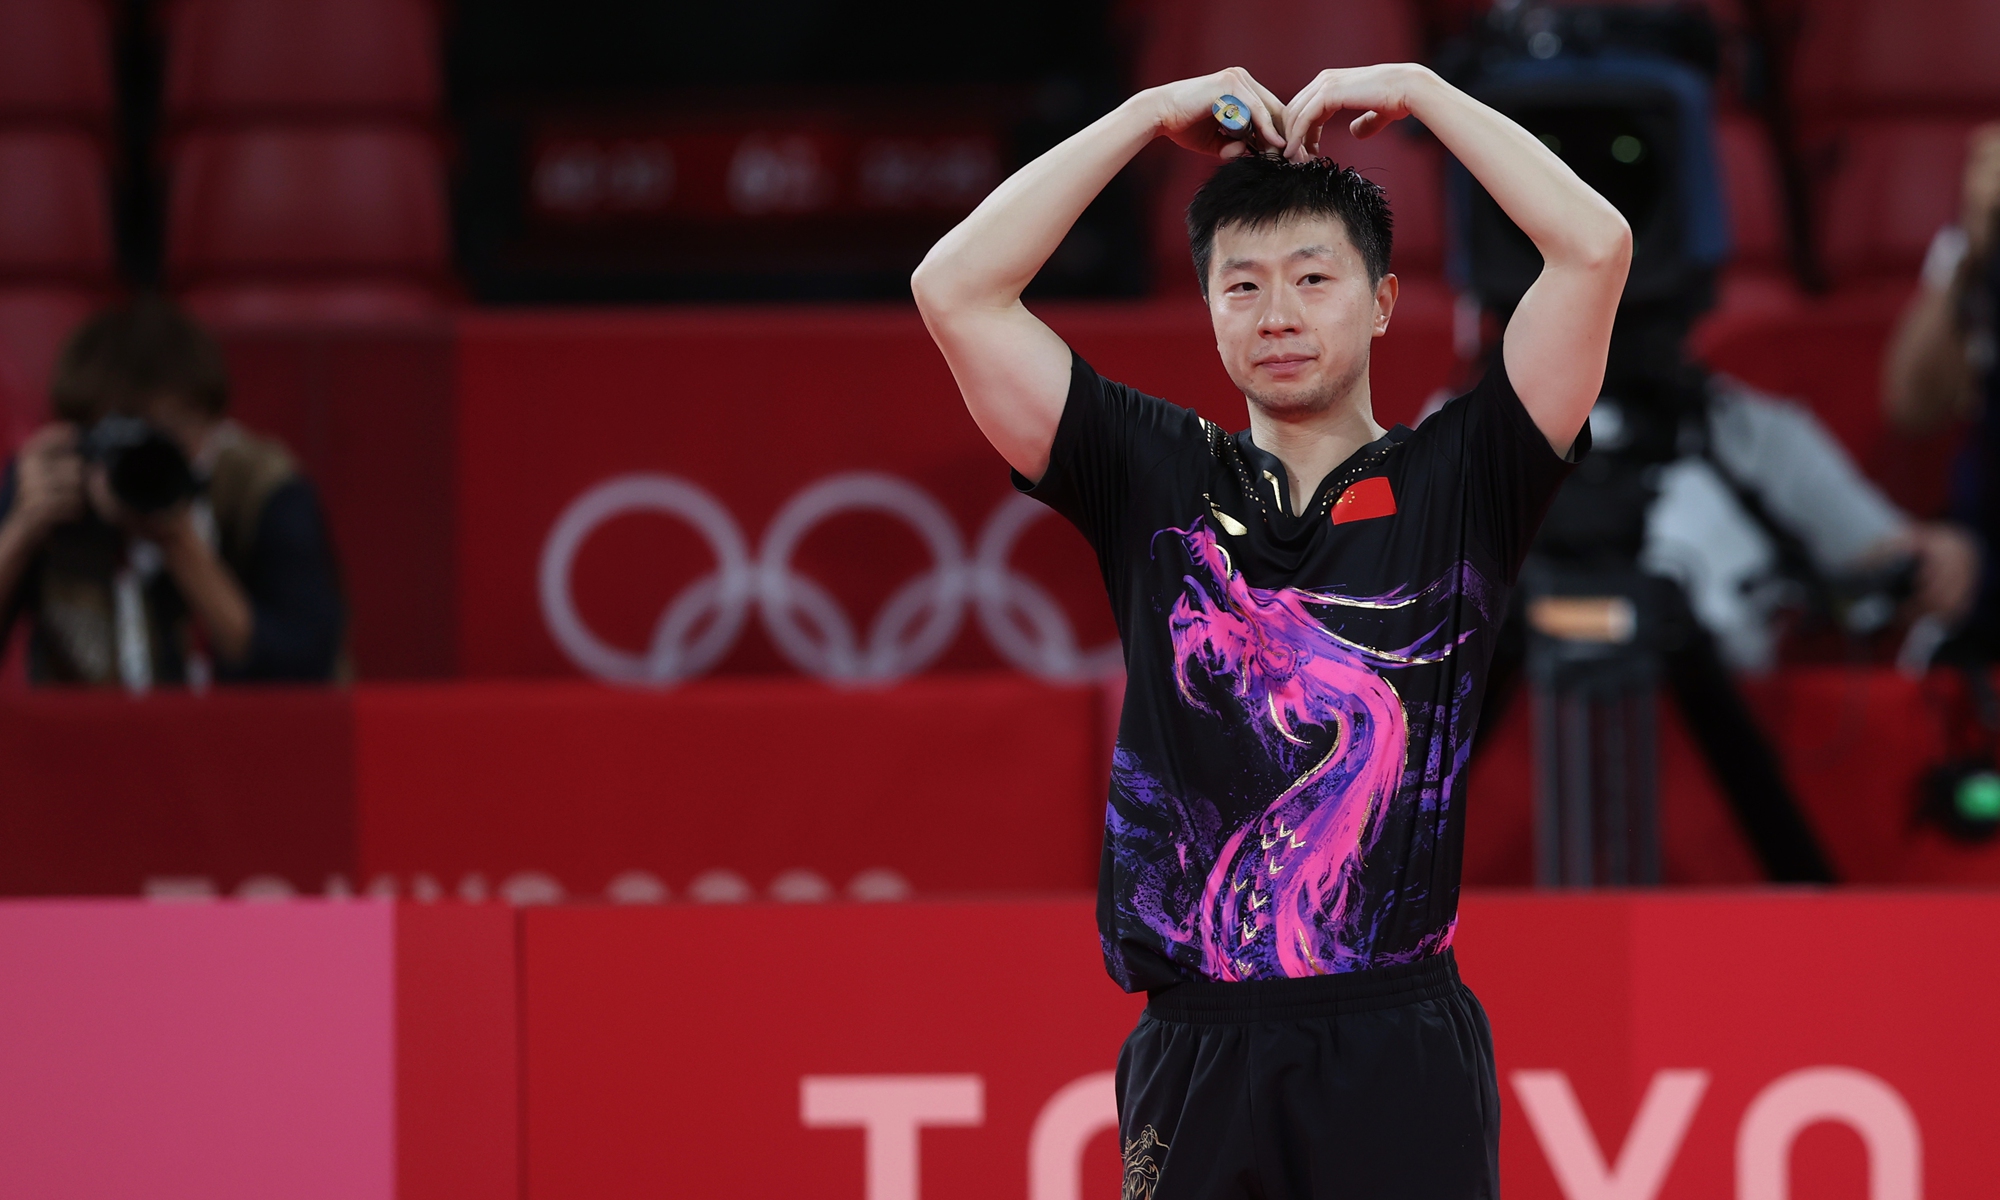 Top 10 Richest Table Tennis Players: The Giants Of This Small Circuit Game